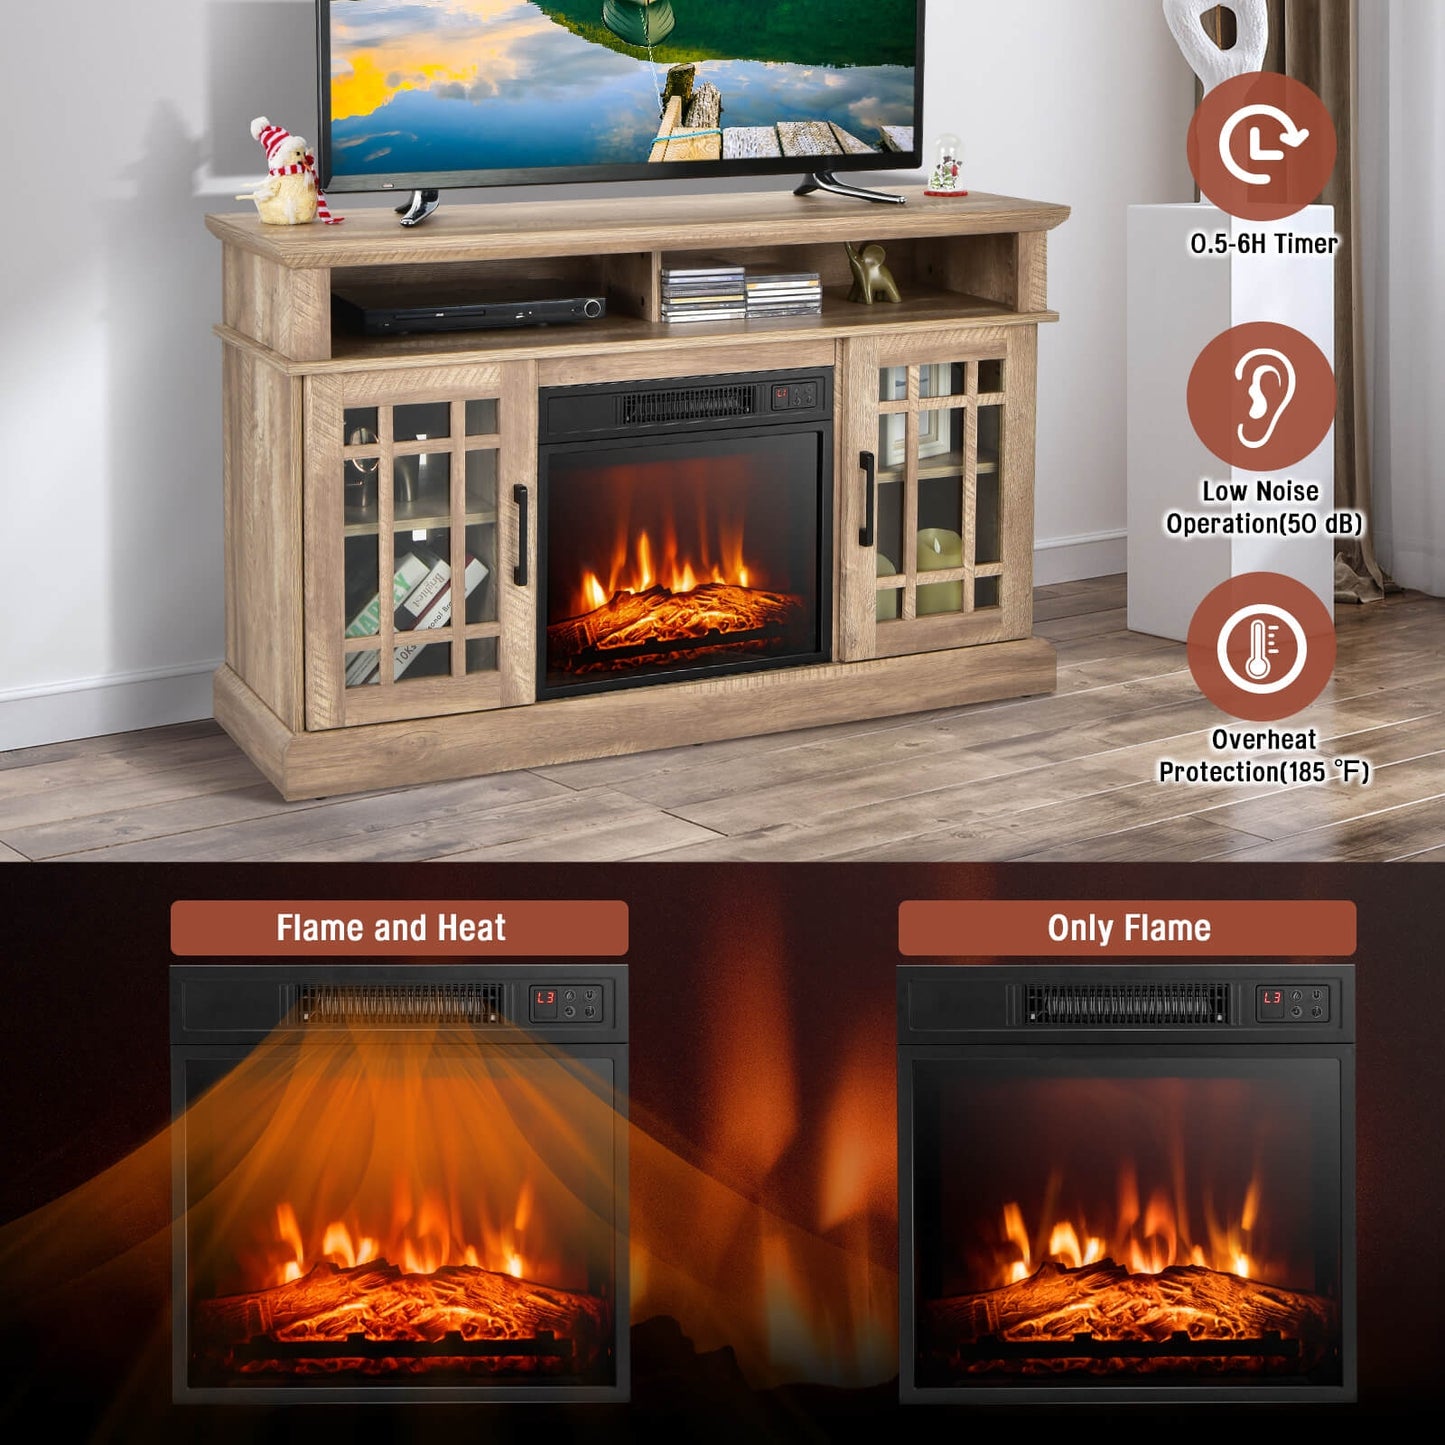 48 Inch Electric Fireplace TV Stand with Cabinets for TVs Up to 55 Inch-Natural